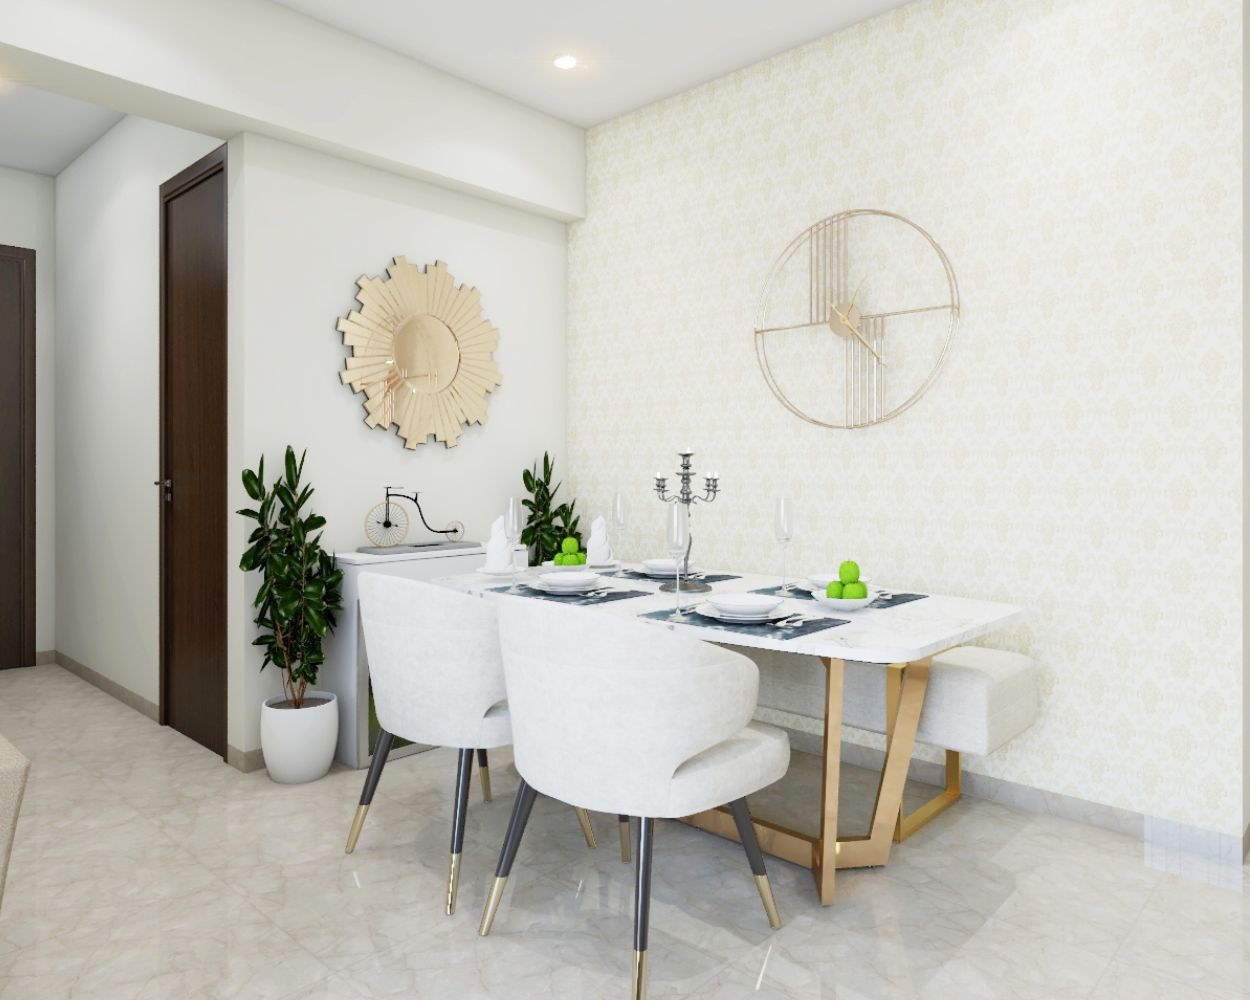 Contemporary 2-Seater White Dining Room Design With Damask Wallpaper